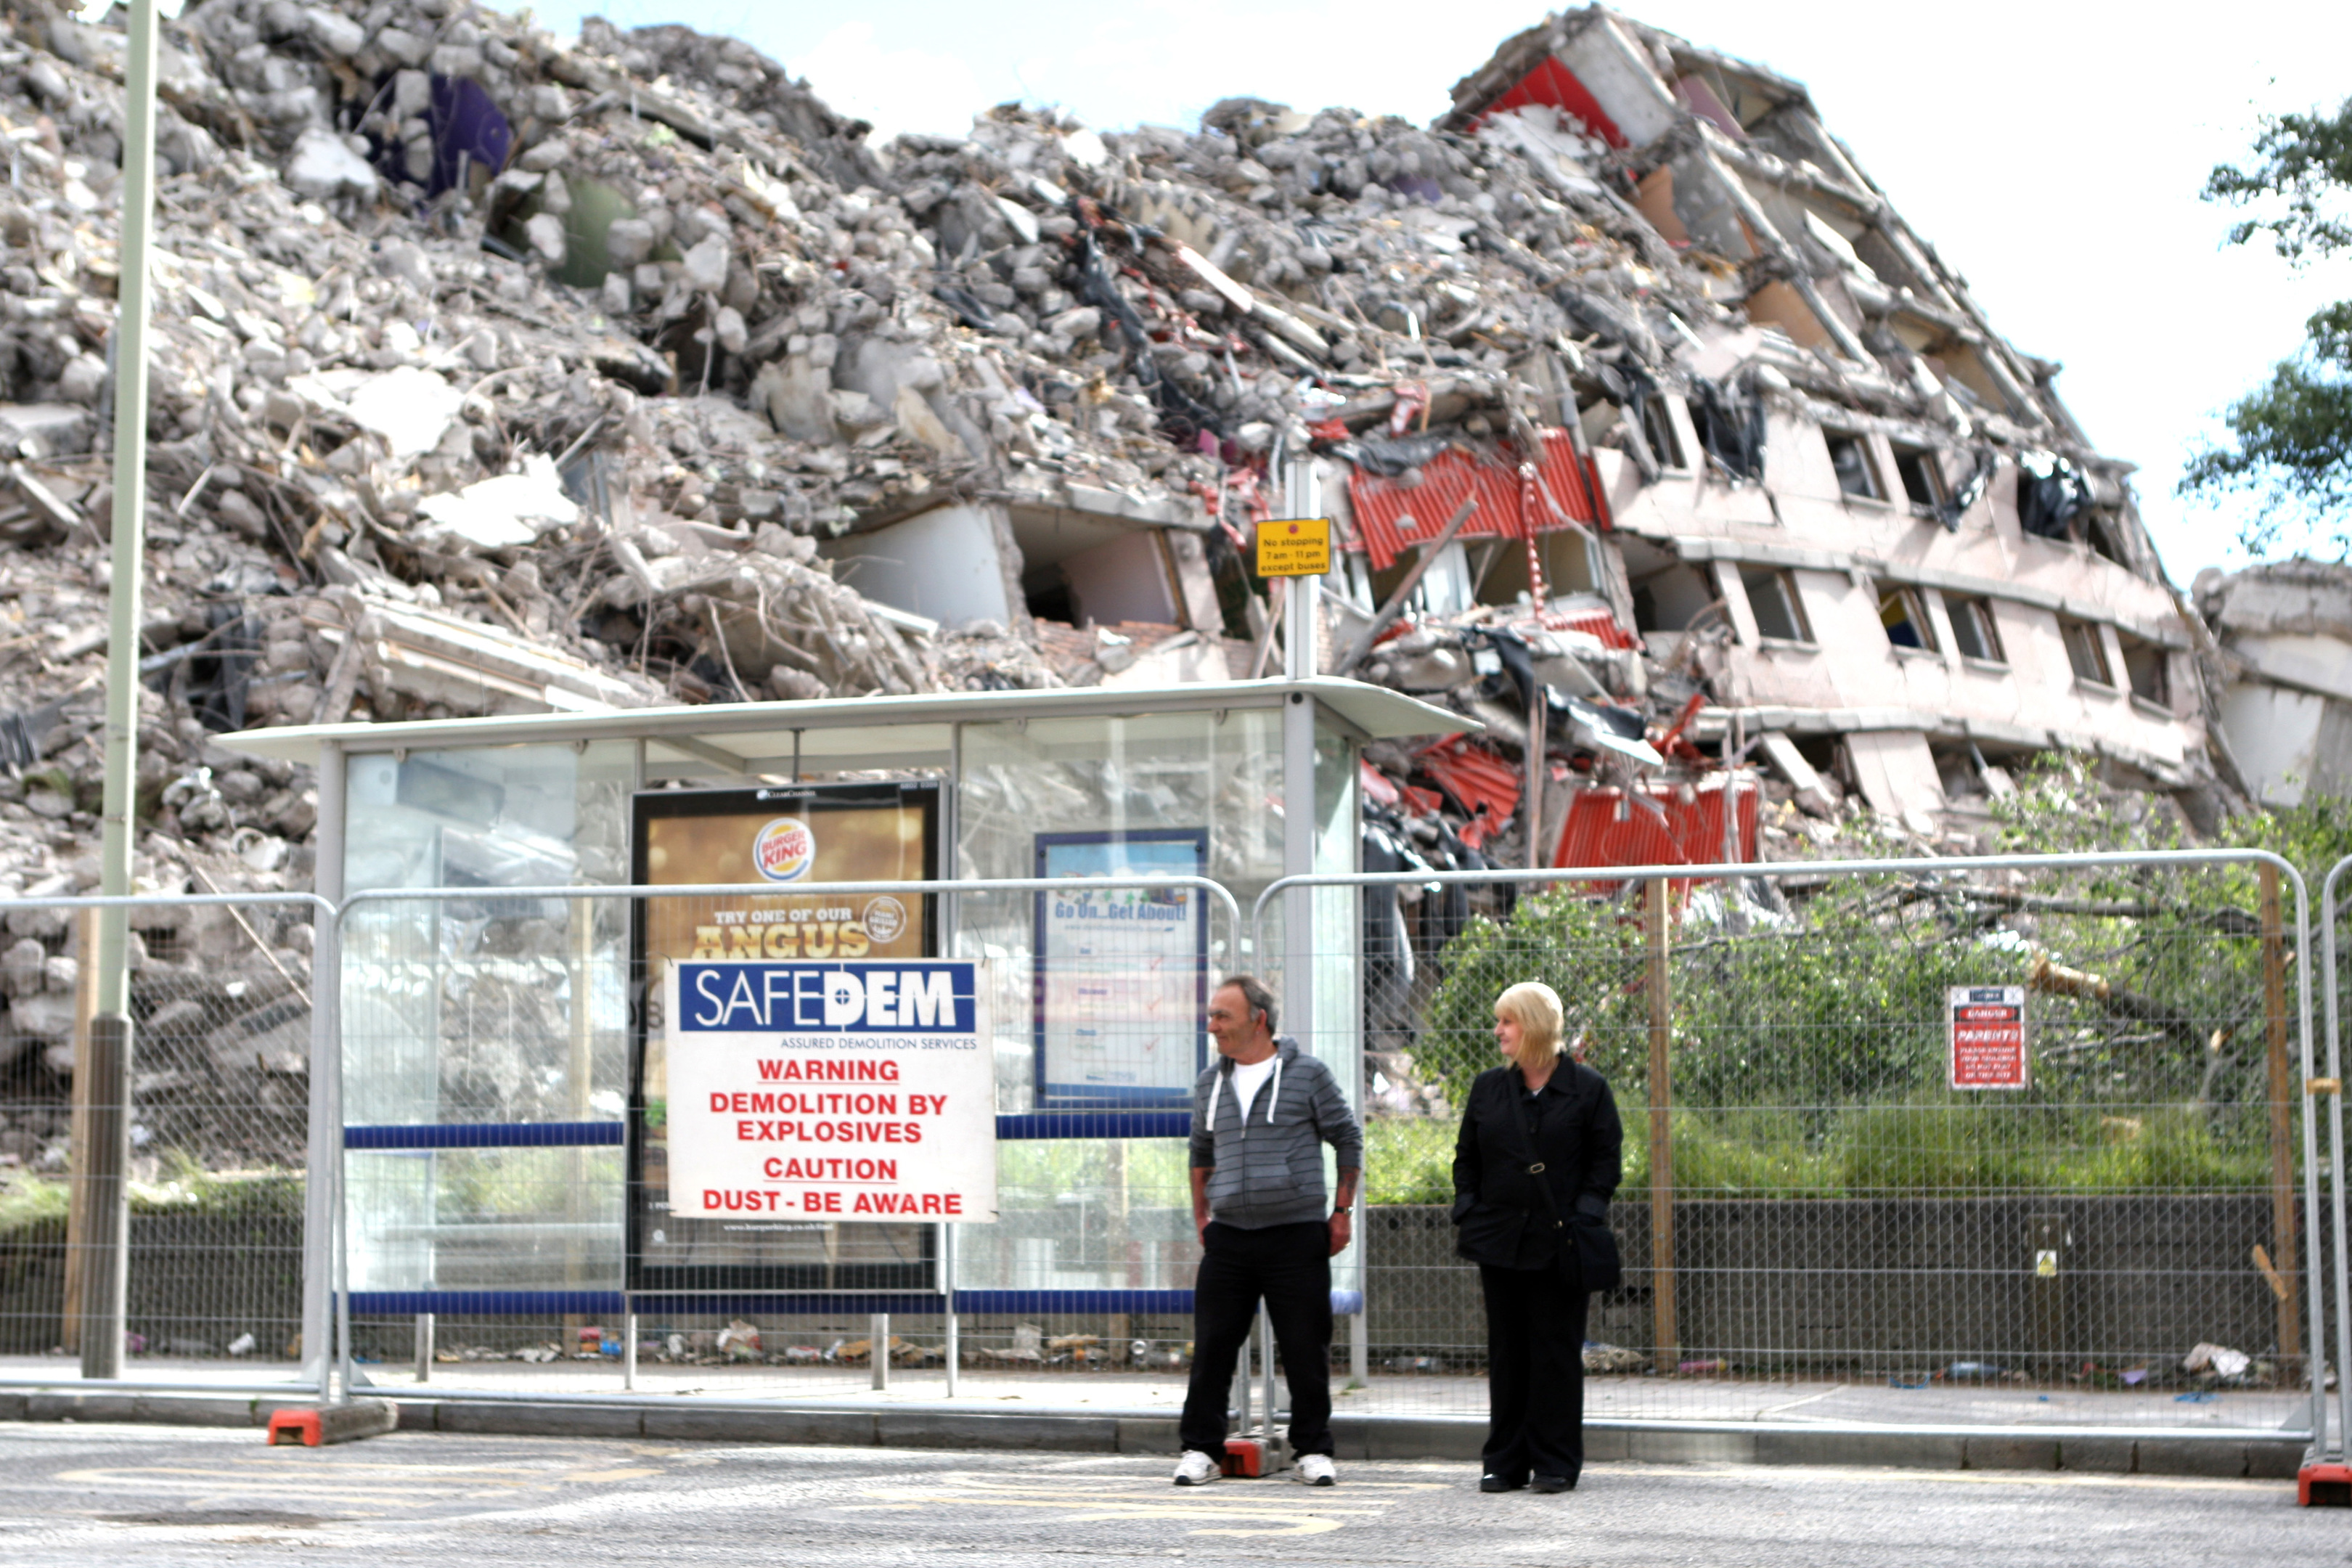 Dundee's Derby Street multis were demolished in 2013 to make way for new more affordable housing